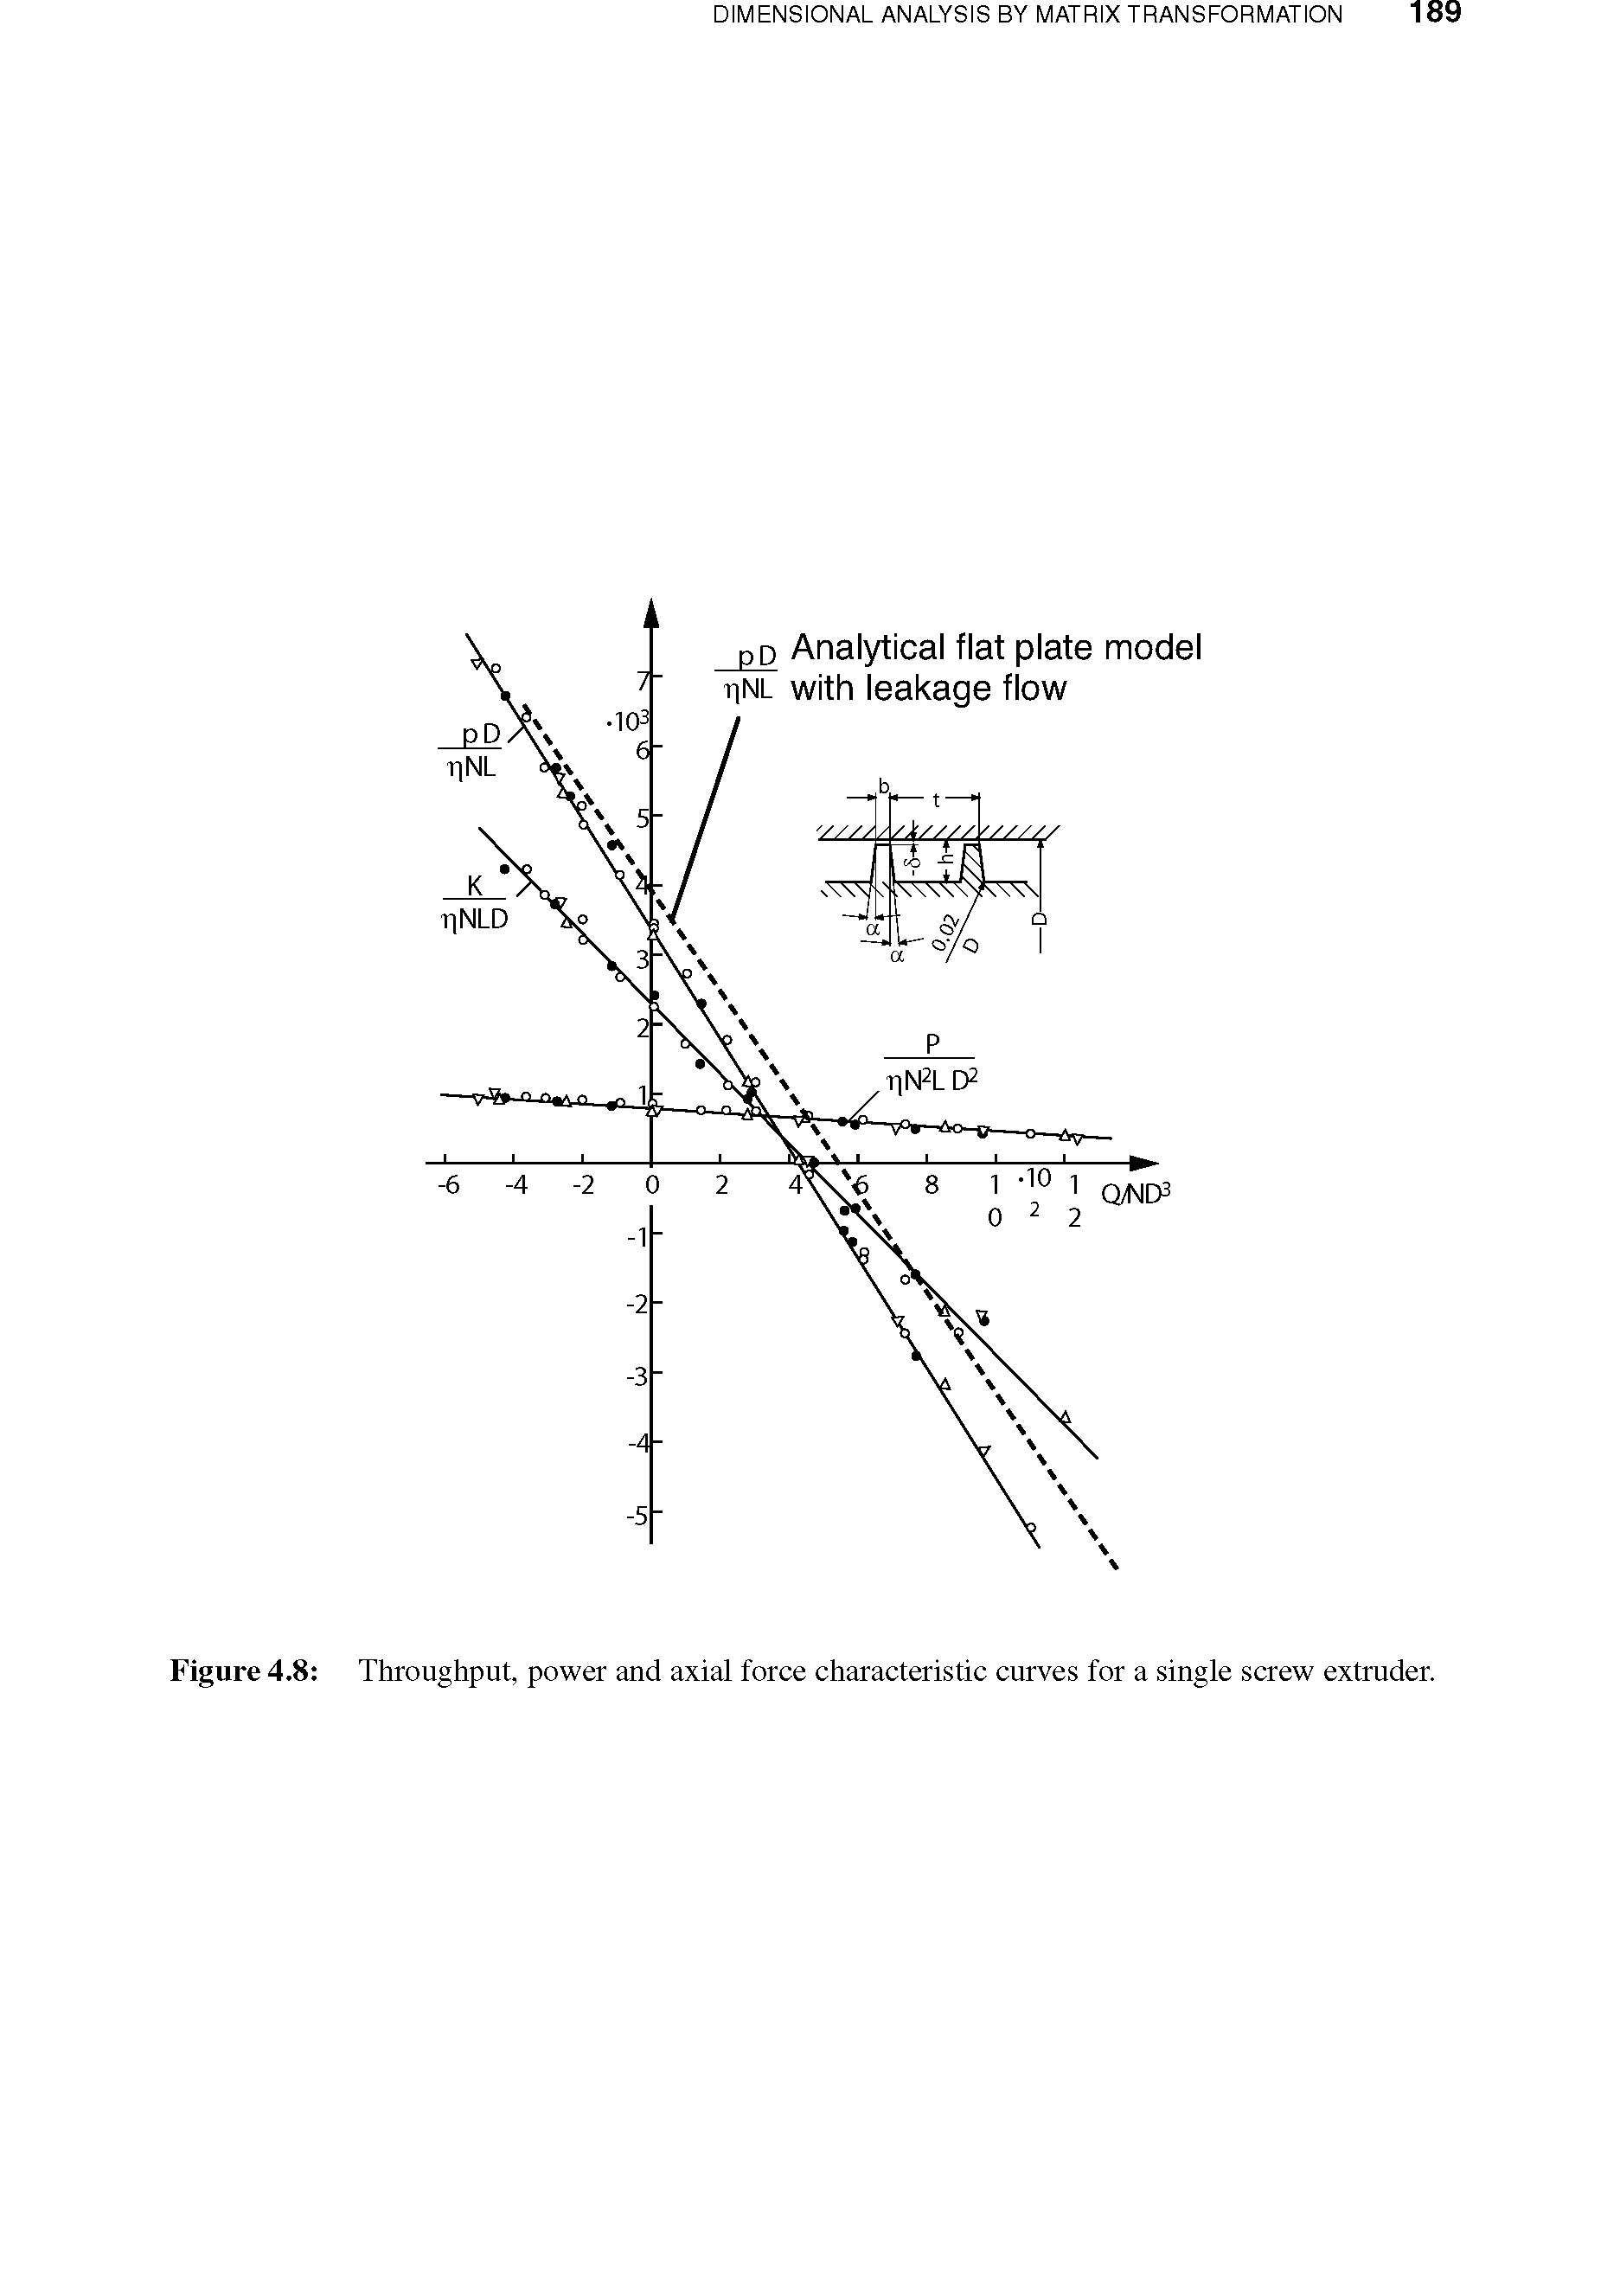 Figure 4.8 Throughput, power and axial force characteristic curves for a single screw extruder.